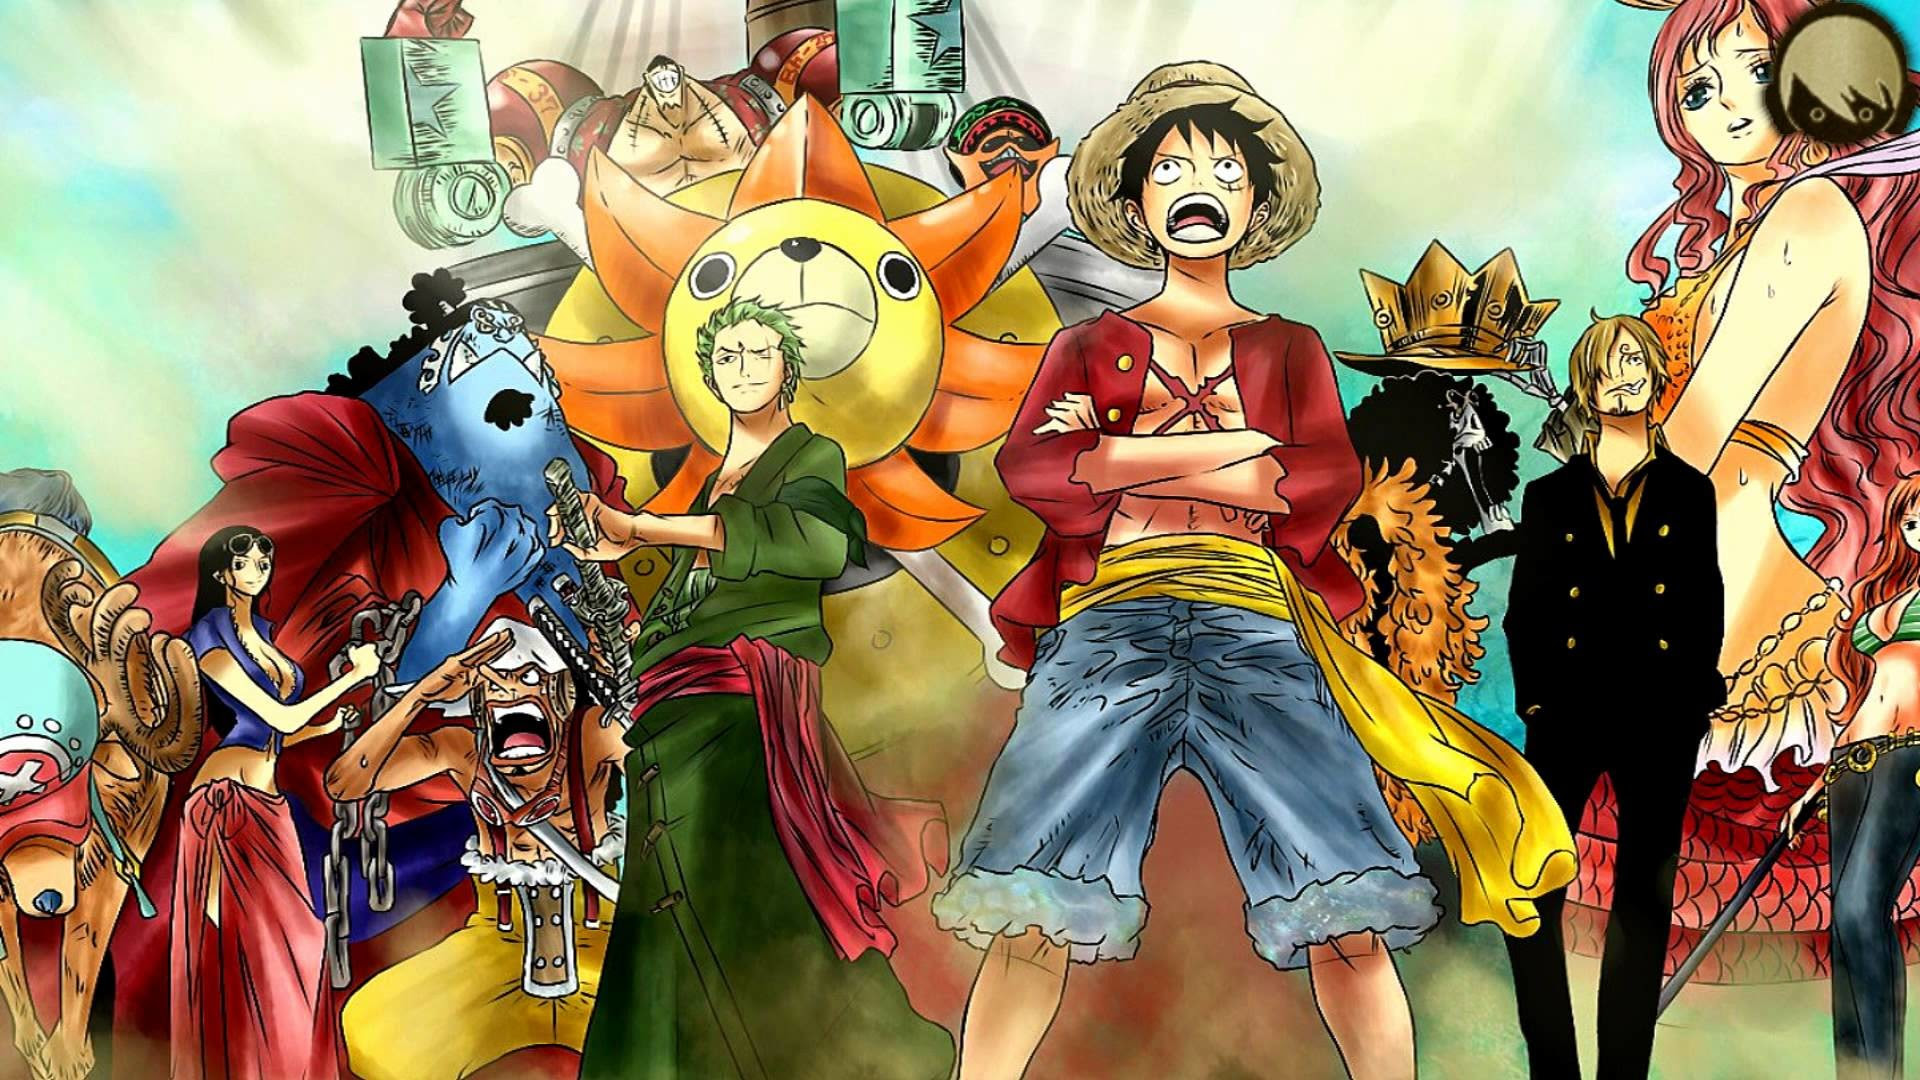 Tons of awesome one piece wallpapers hd  Wallpaper One Piece 1920X1080